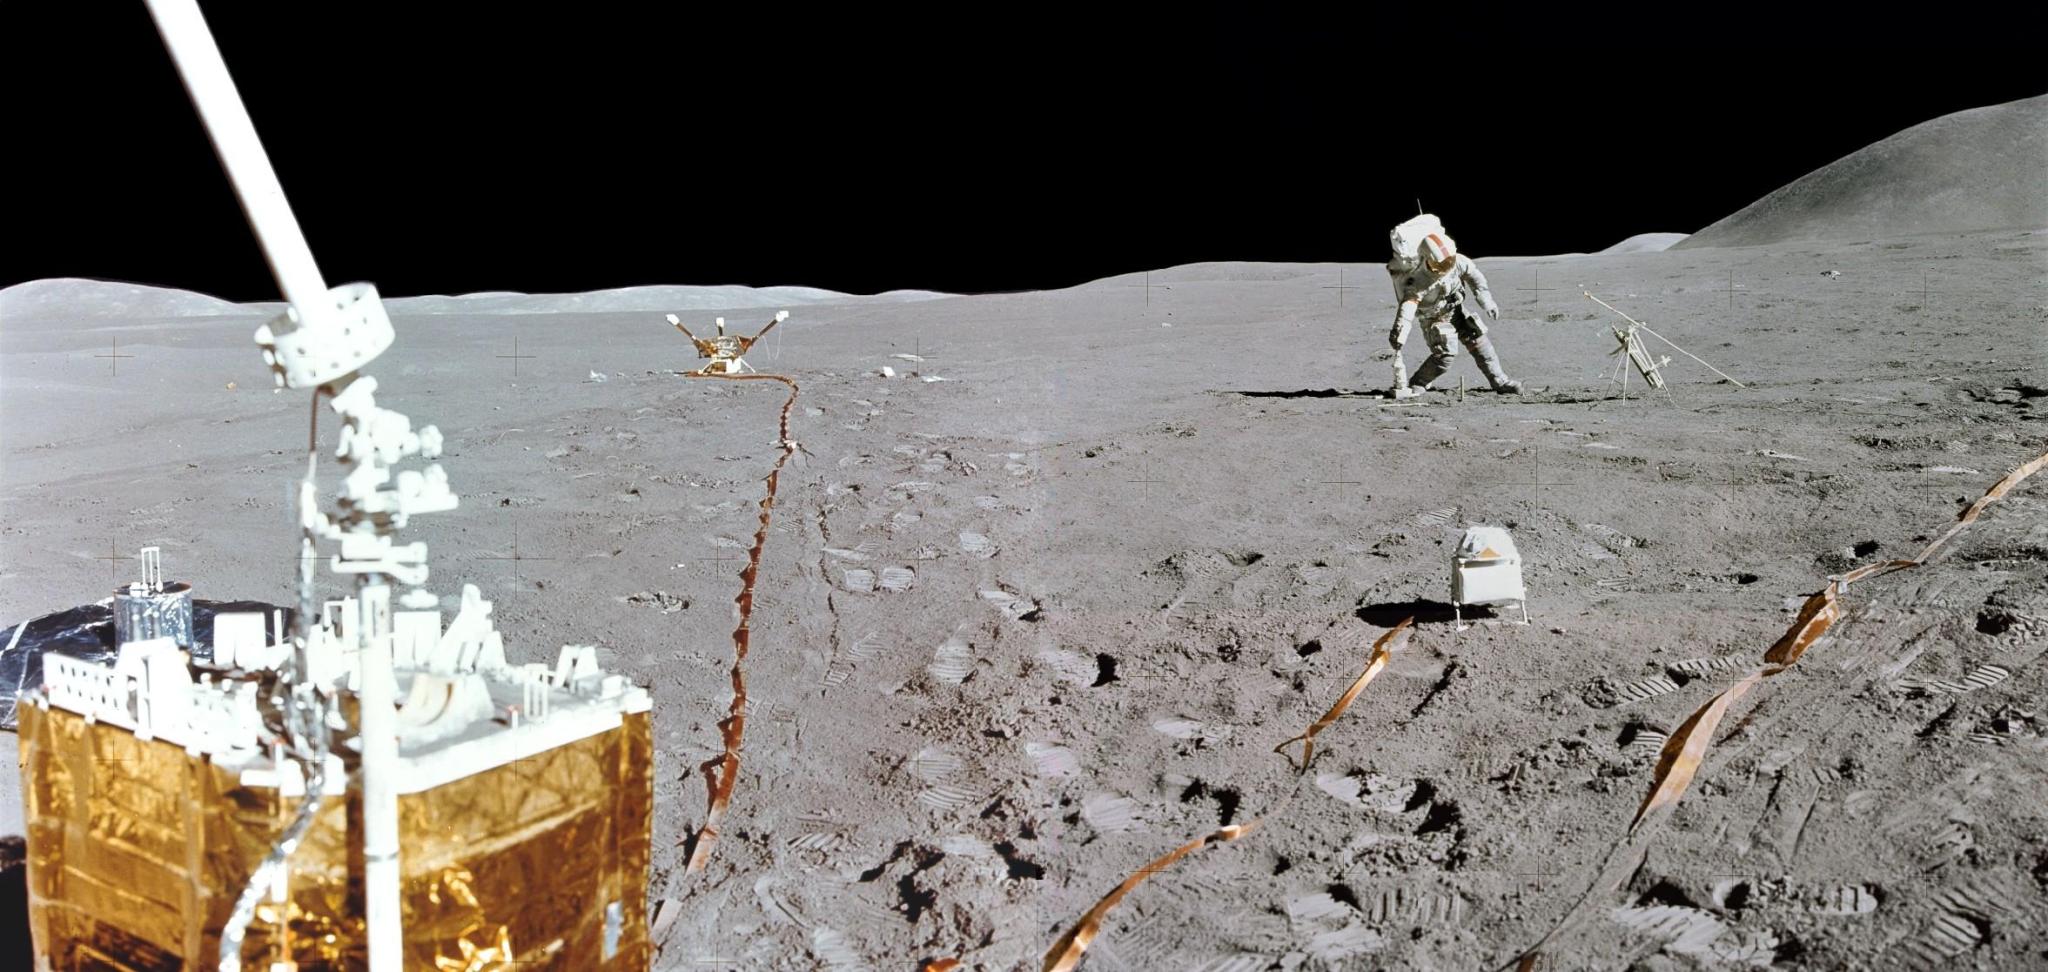 A mini-panorama combining two photographs taken by Apollo 15 lunar module pilot Jim Irwin at the end of the second Apollo 15 moonwalk in 1971.